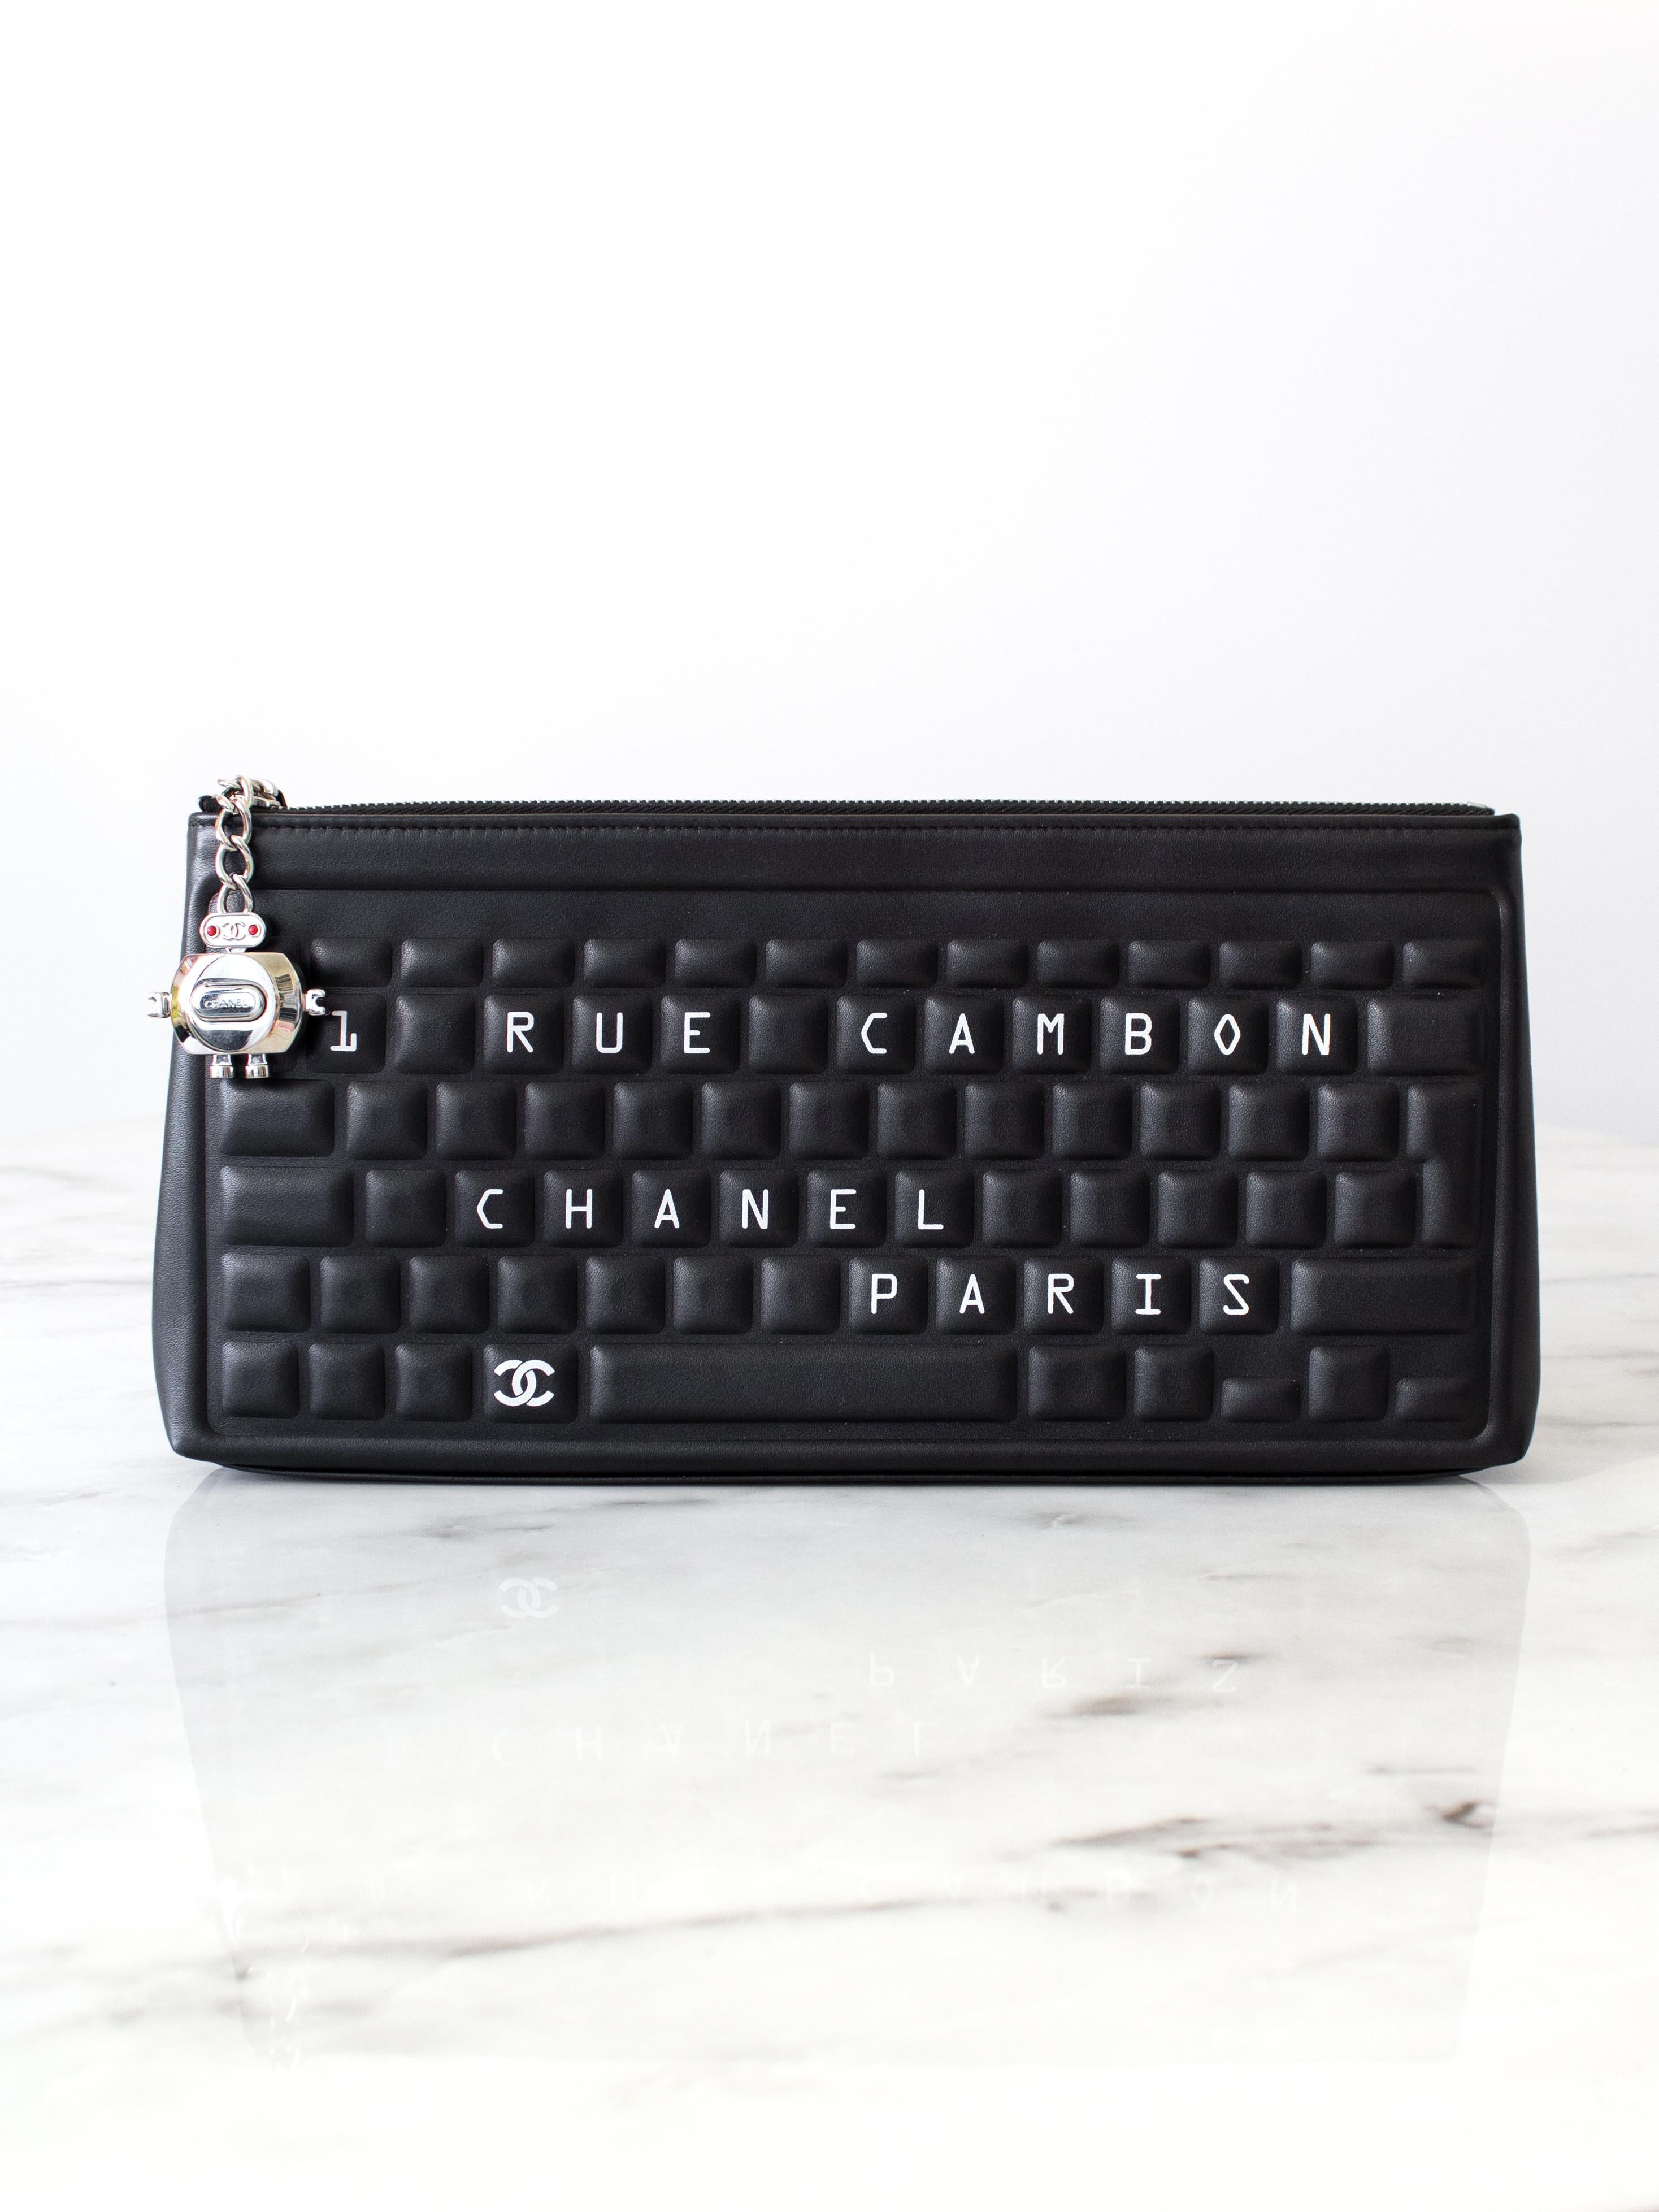 Introducing the most wanted keyboard clutch from Chanel's Spring/Summer 2017 Data Center Collection, the epitome of tech-meets-fashion. This sleek clutch bag is a must-have for any techie fashionista or avid collector. Crafted from luxurious